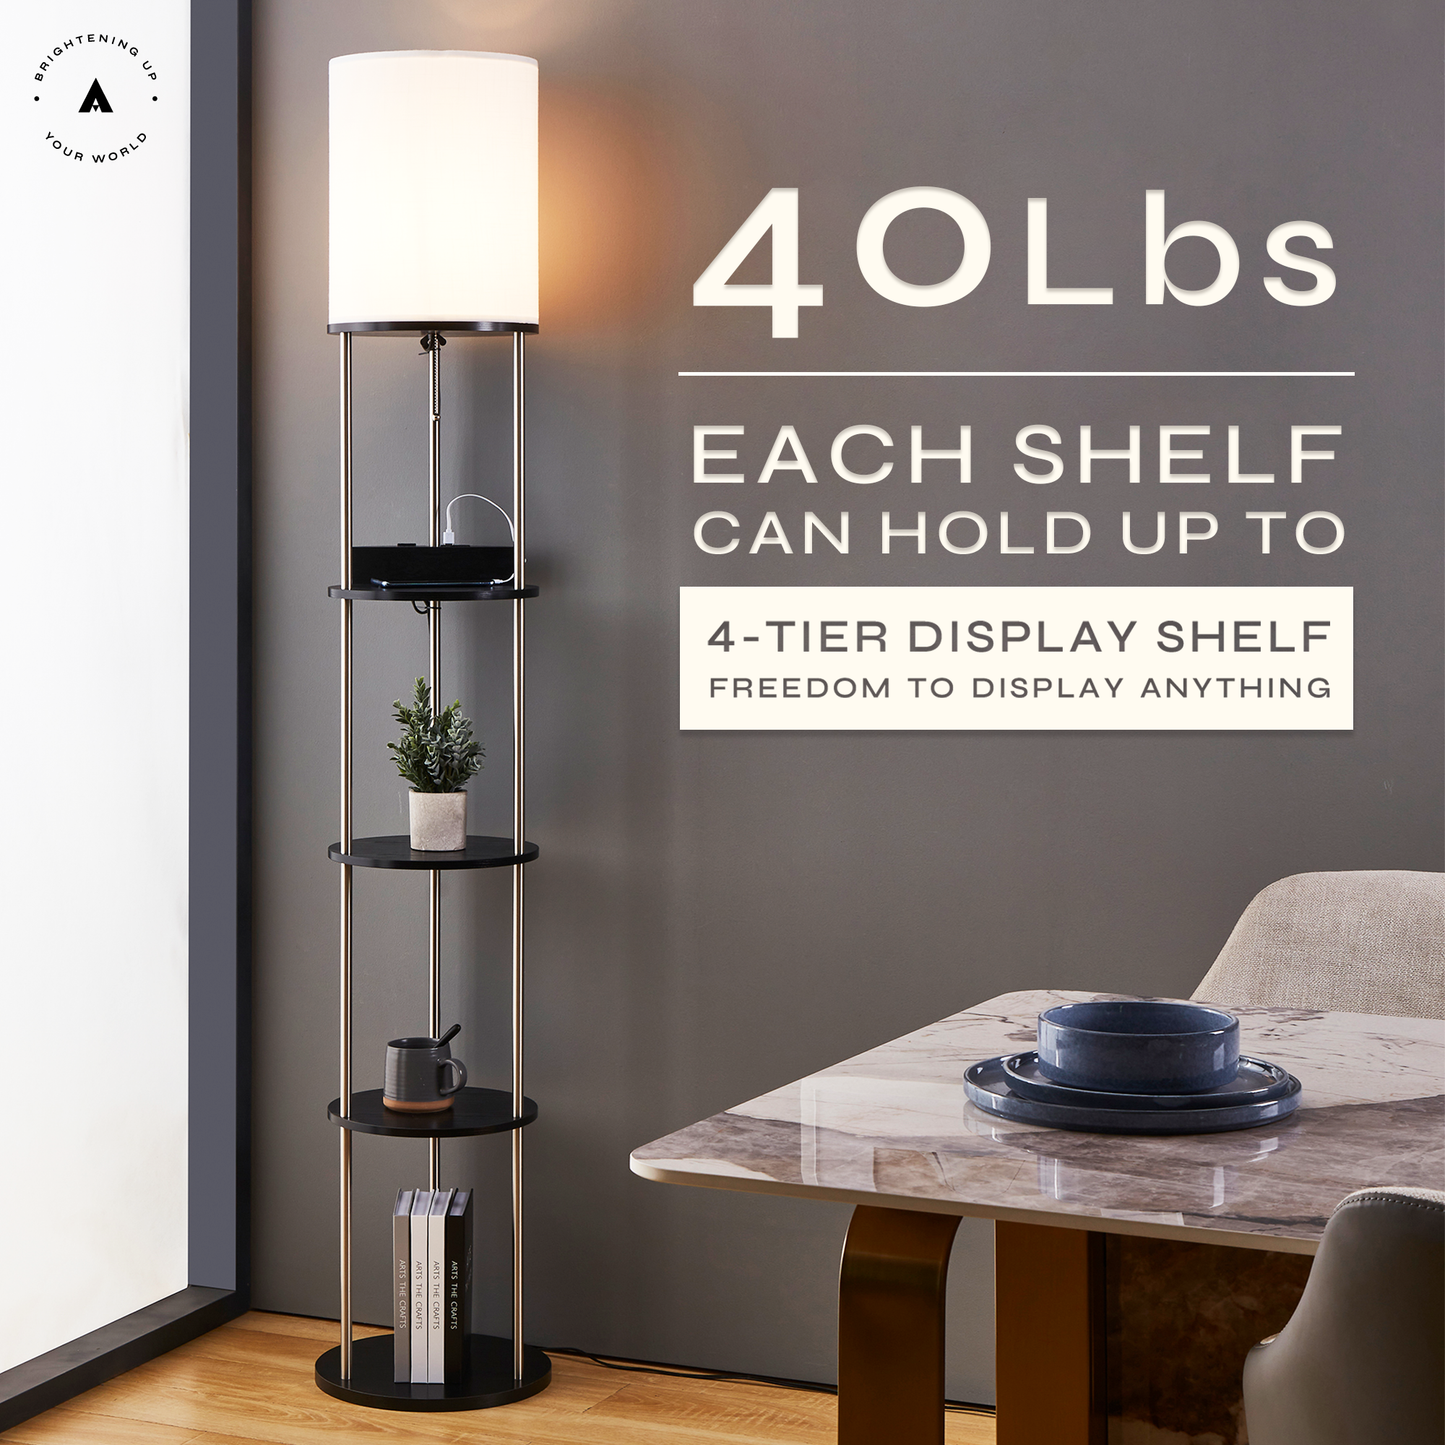 Aria Plus - 72" Floor Lamp with Charging Station